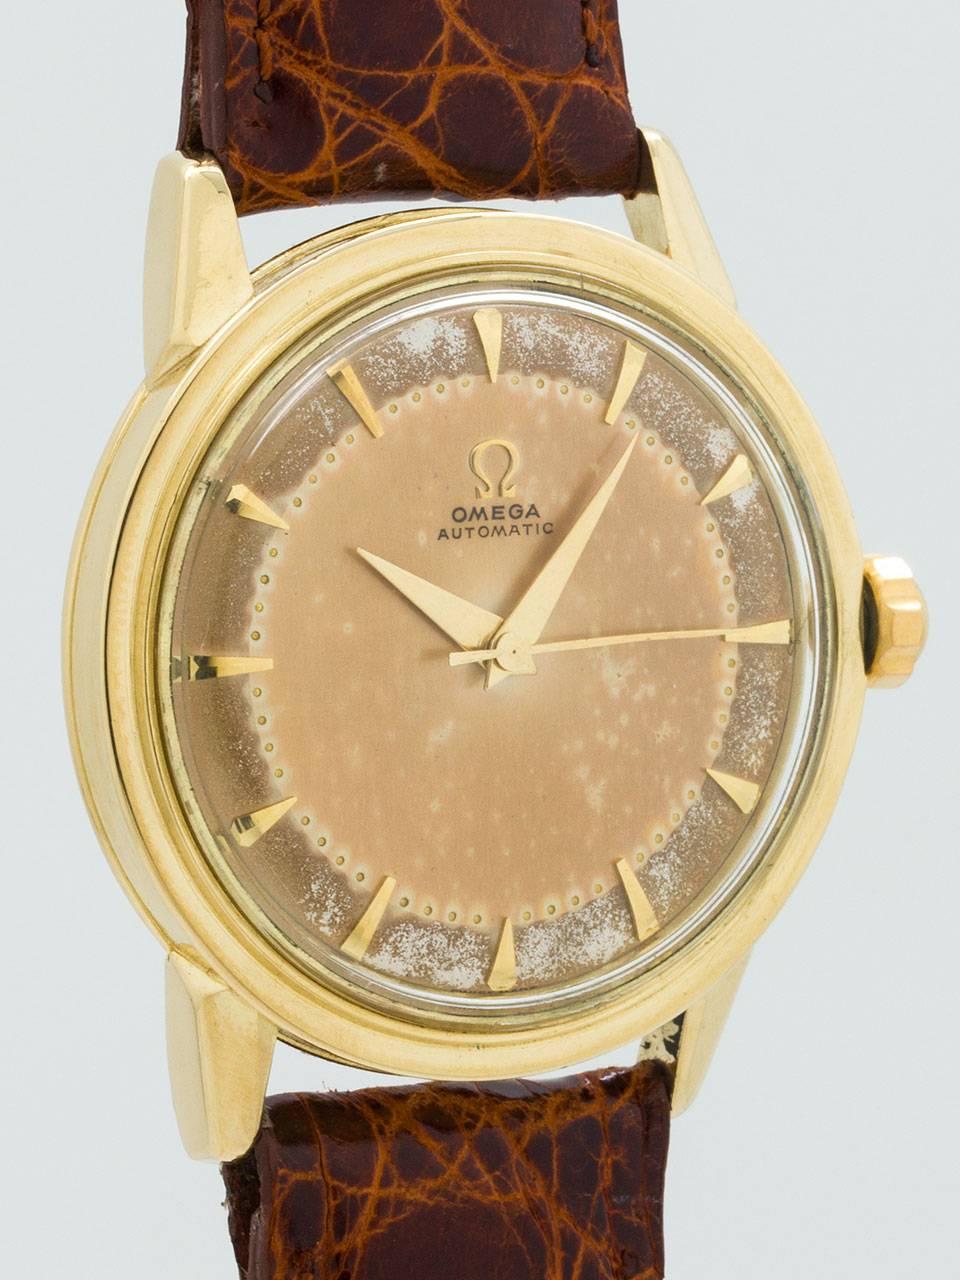 Omega 14K Yellow Gold Patina'd Automatic Wristwatch ref 2736 SC circa 1952. Featuring robust 34 X 39mm case with screw down case back with acrylic crystal and signed Omega crown. Original 2 tone richly patina’d dial with applied gold tapered